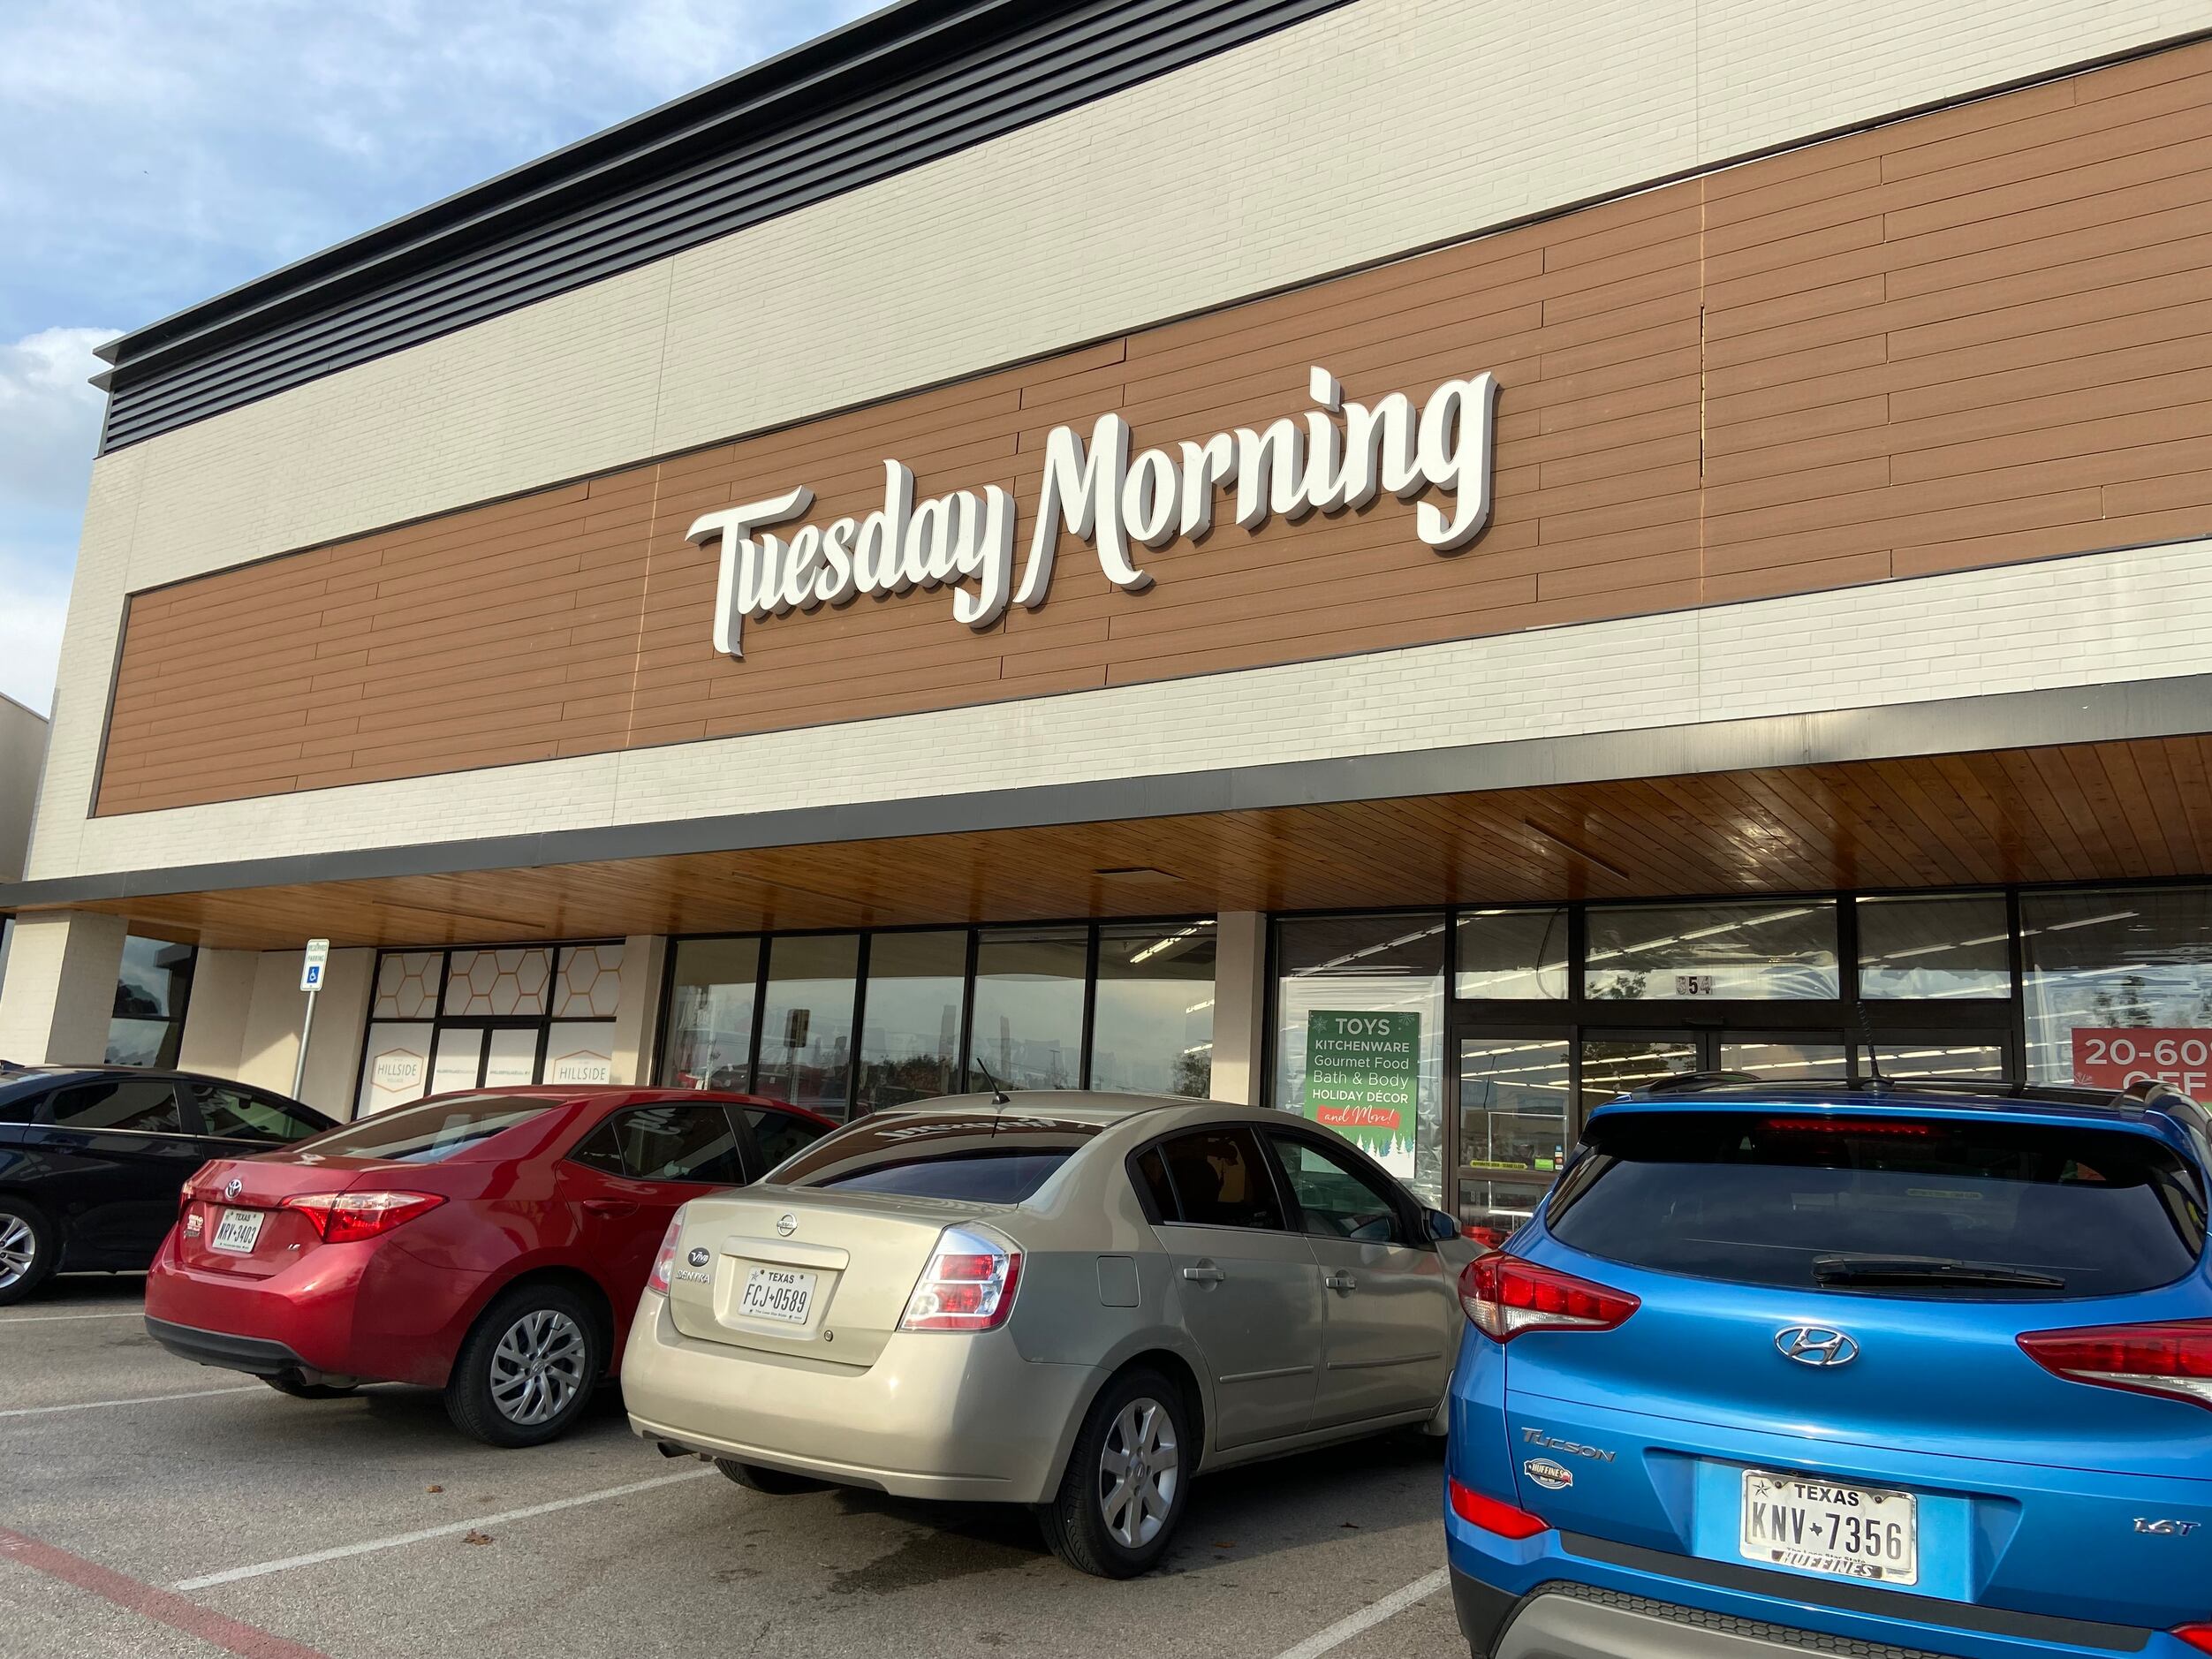 Out of business sales begin across Tuesday Morning stores